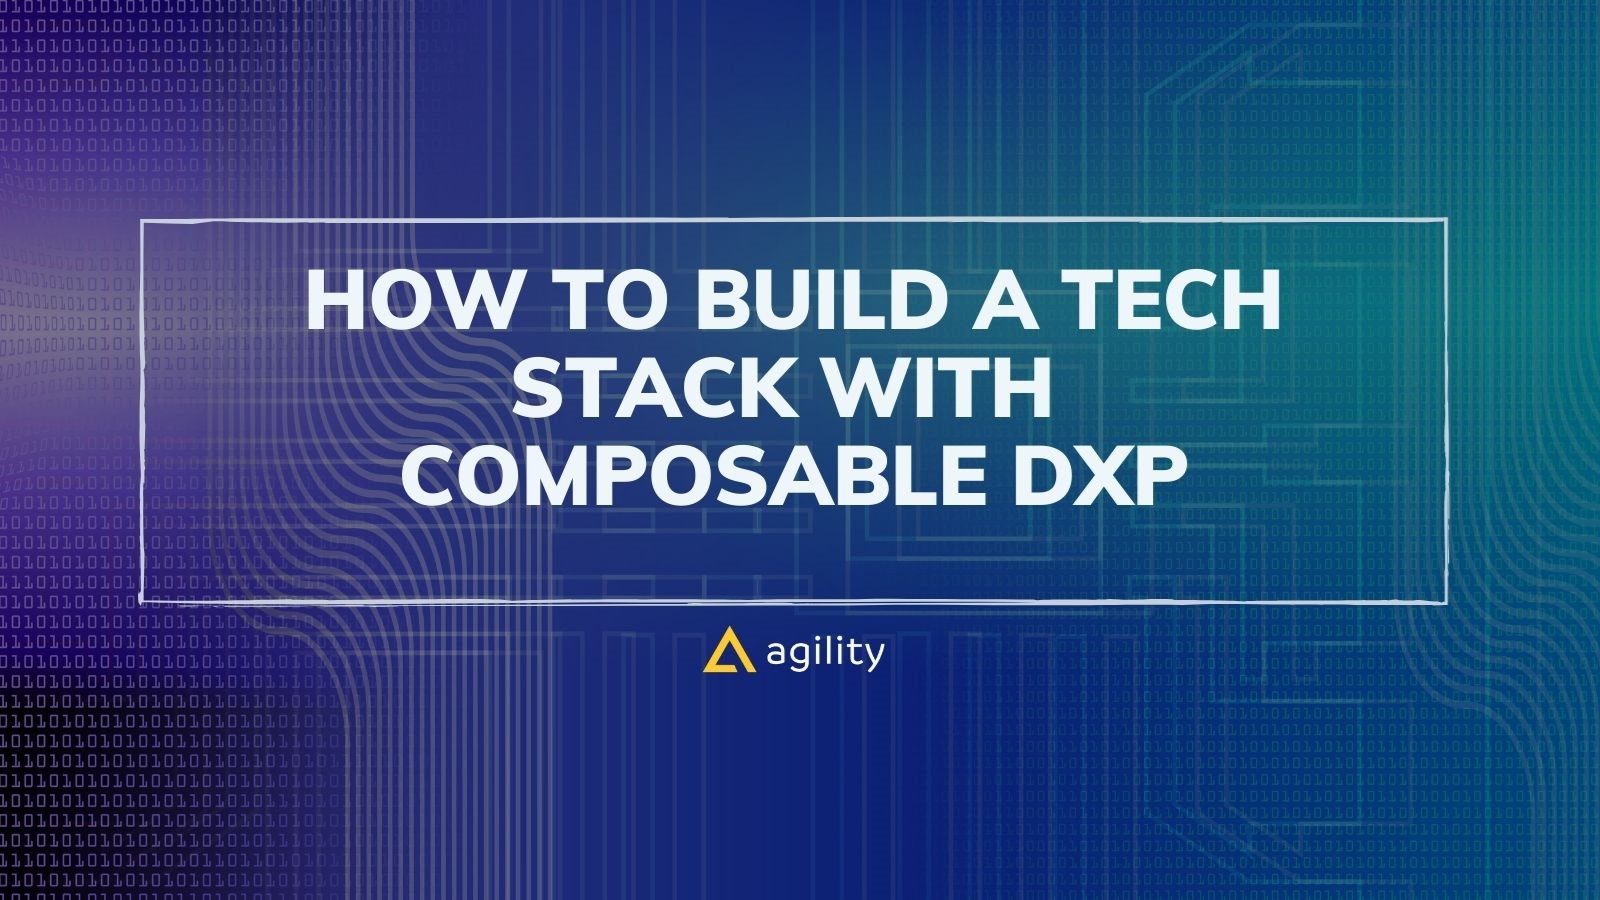 How To Build A Tech Stack With Composable DXP